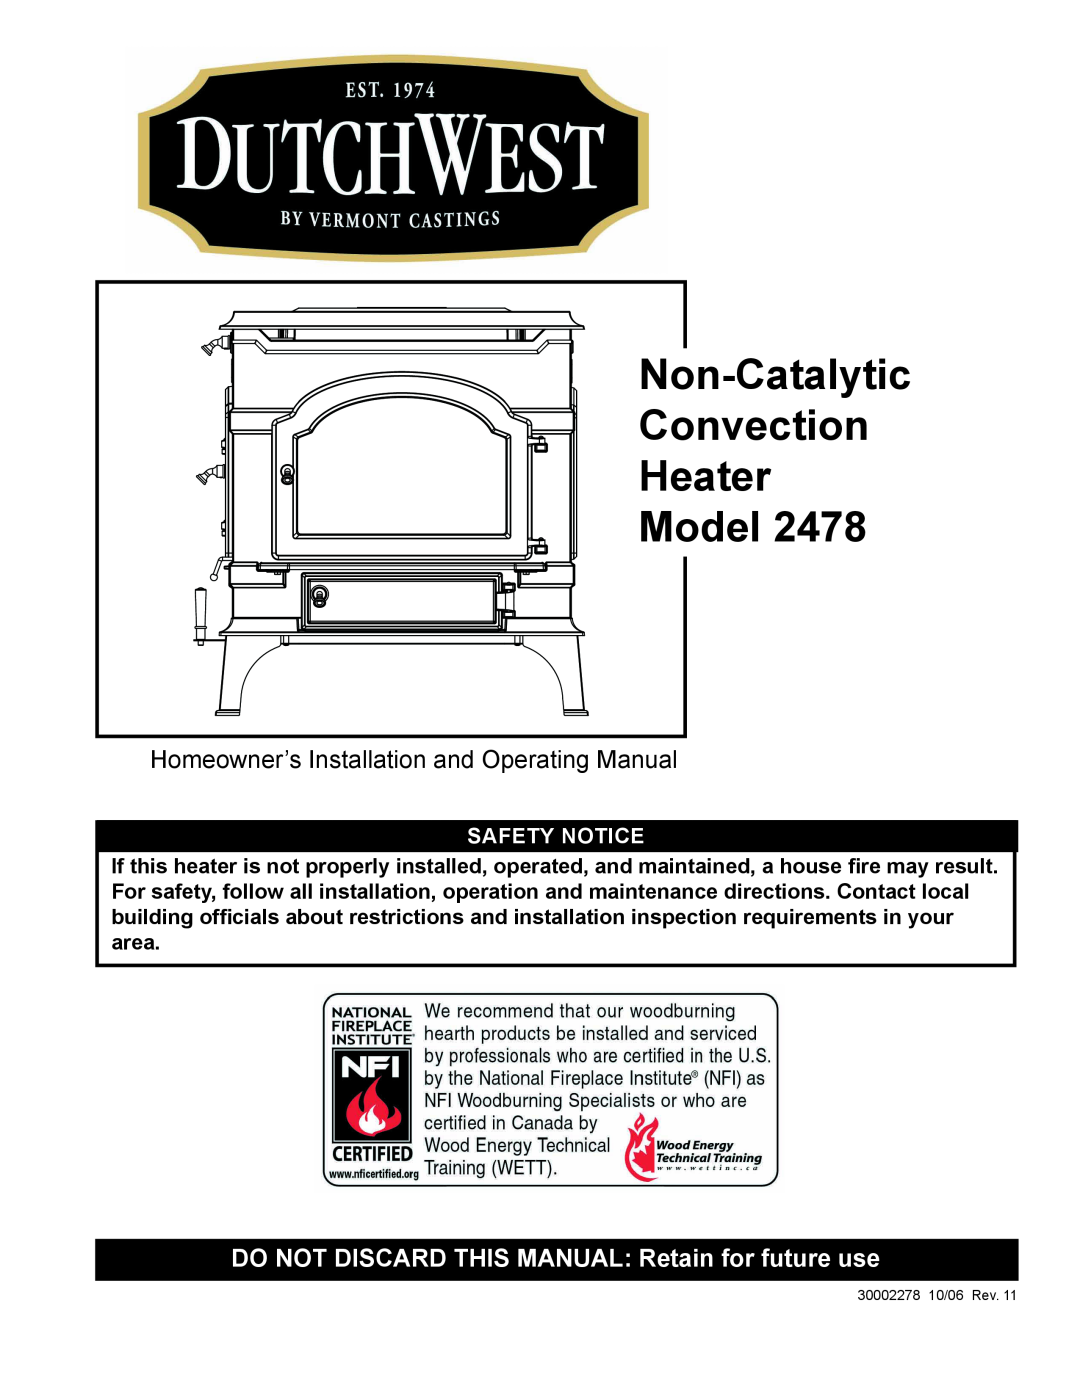 Vermont Casting 2478 manual Non-Catalytic Convection Heater Model, DO NOT DISCARD THIS MANUAL Retain for future use 